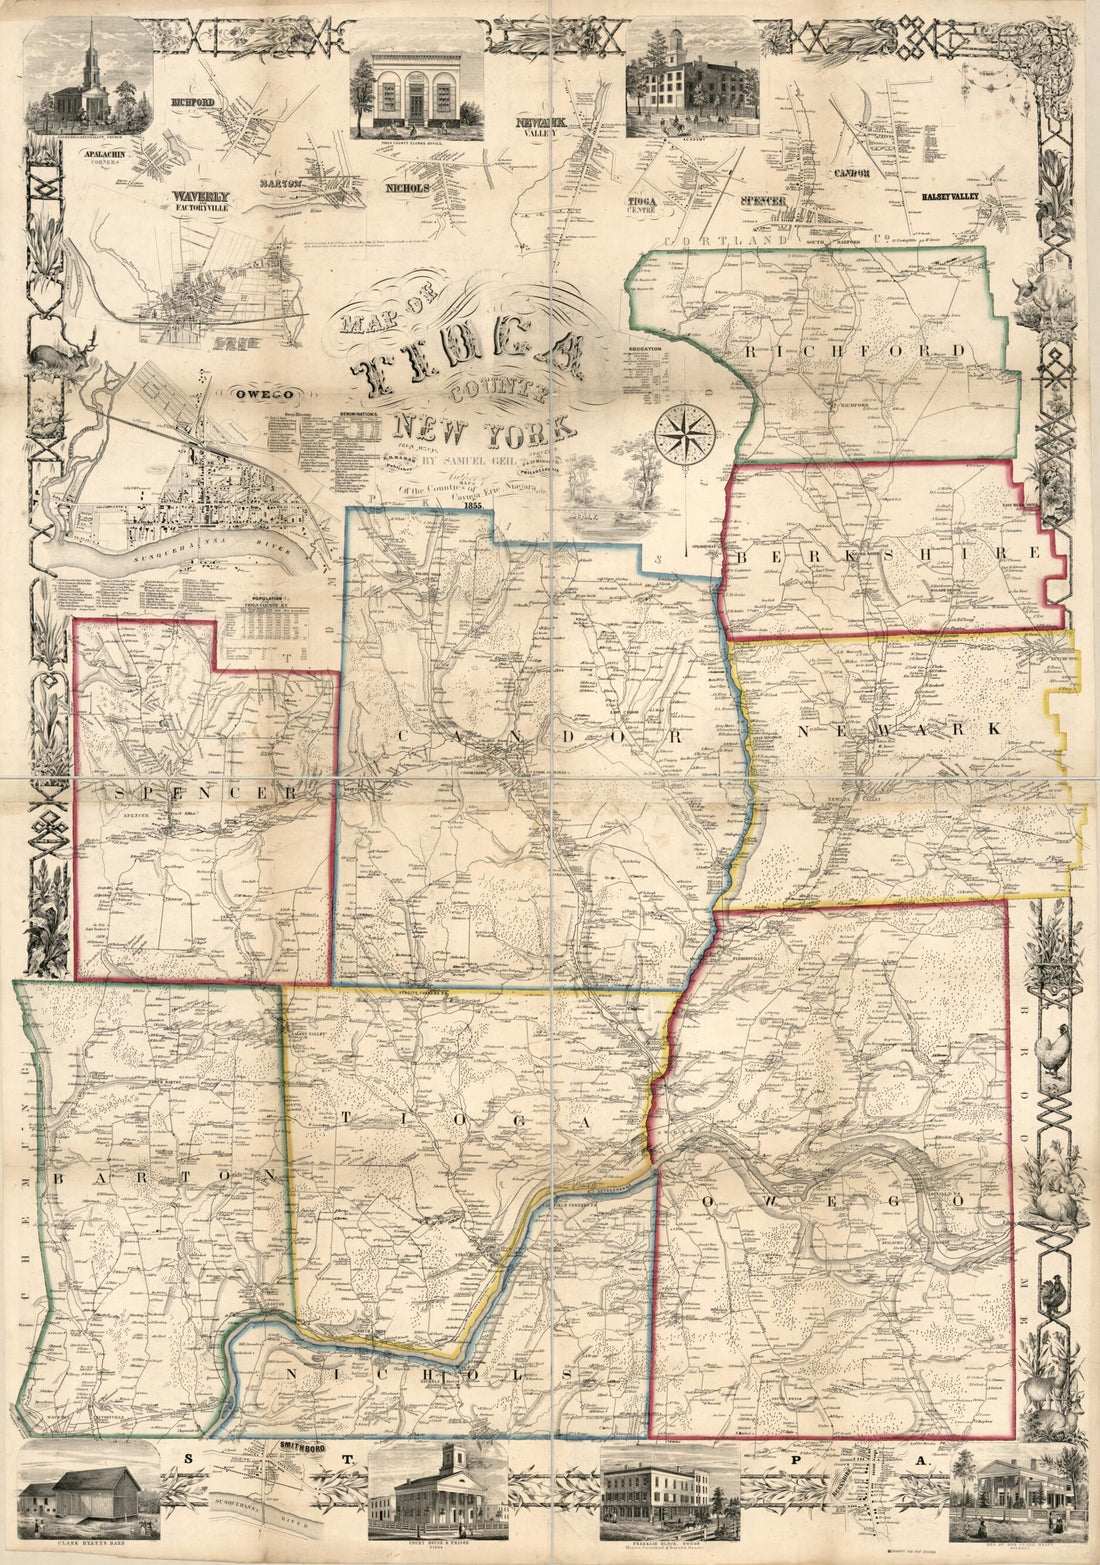 This old map of Map of Tioga County, New York : from Actual Surveys from 1855 was created by Samuel Geil, E. D. Marsh, Robert Pearsall Smith in 1855